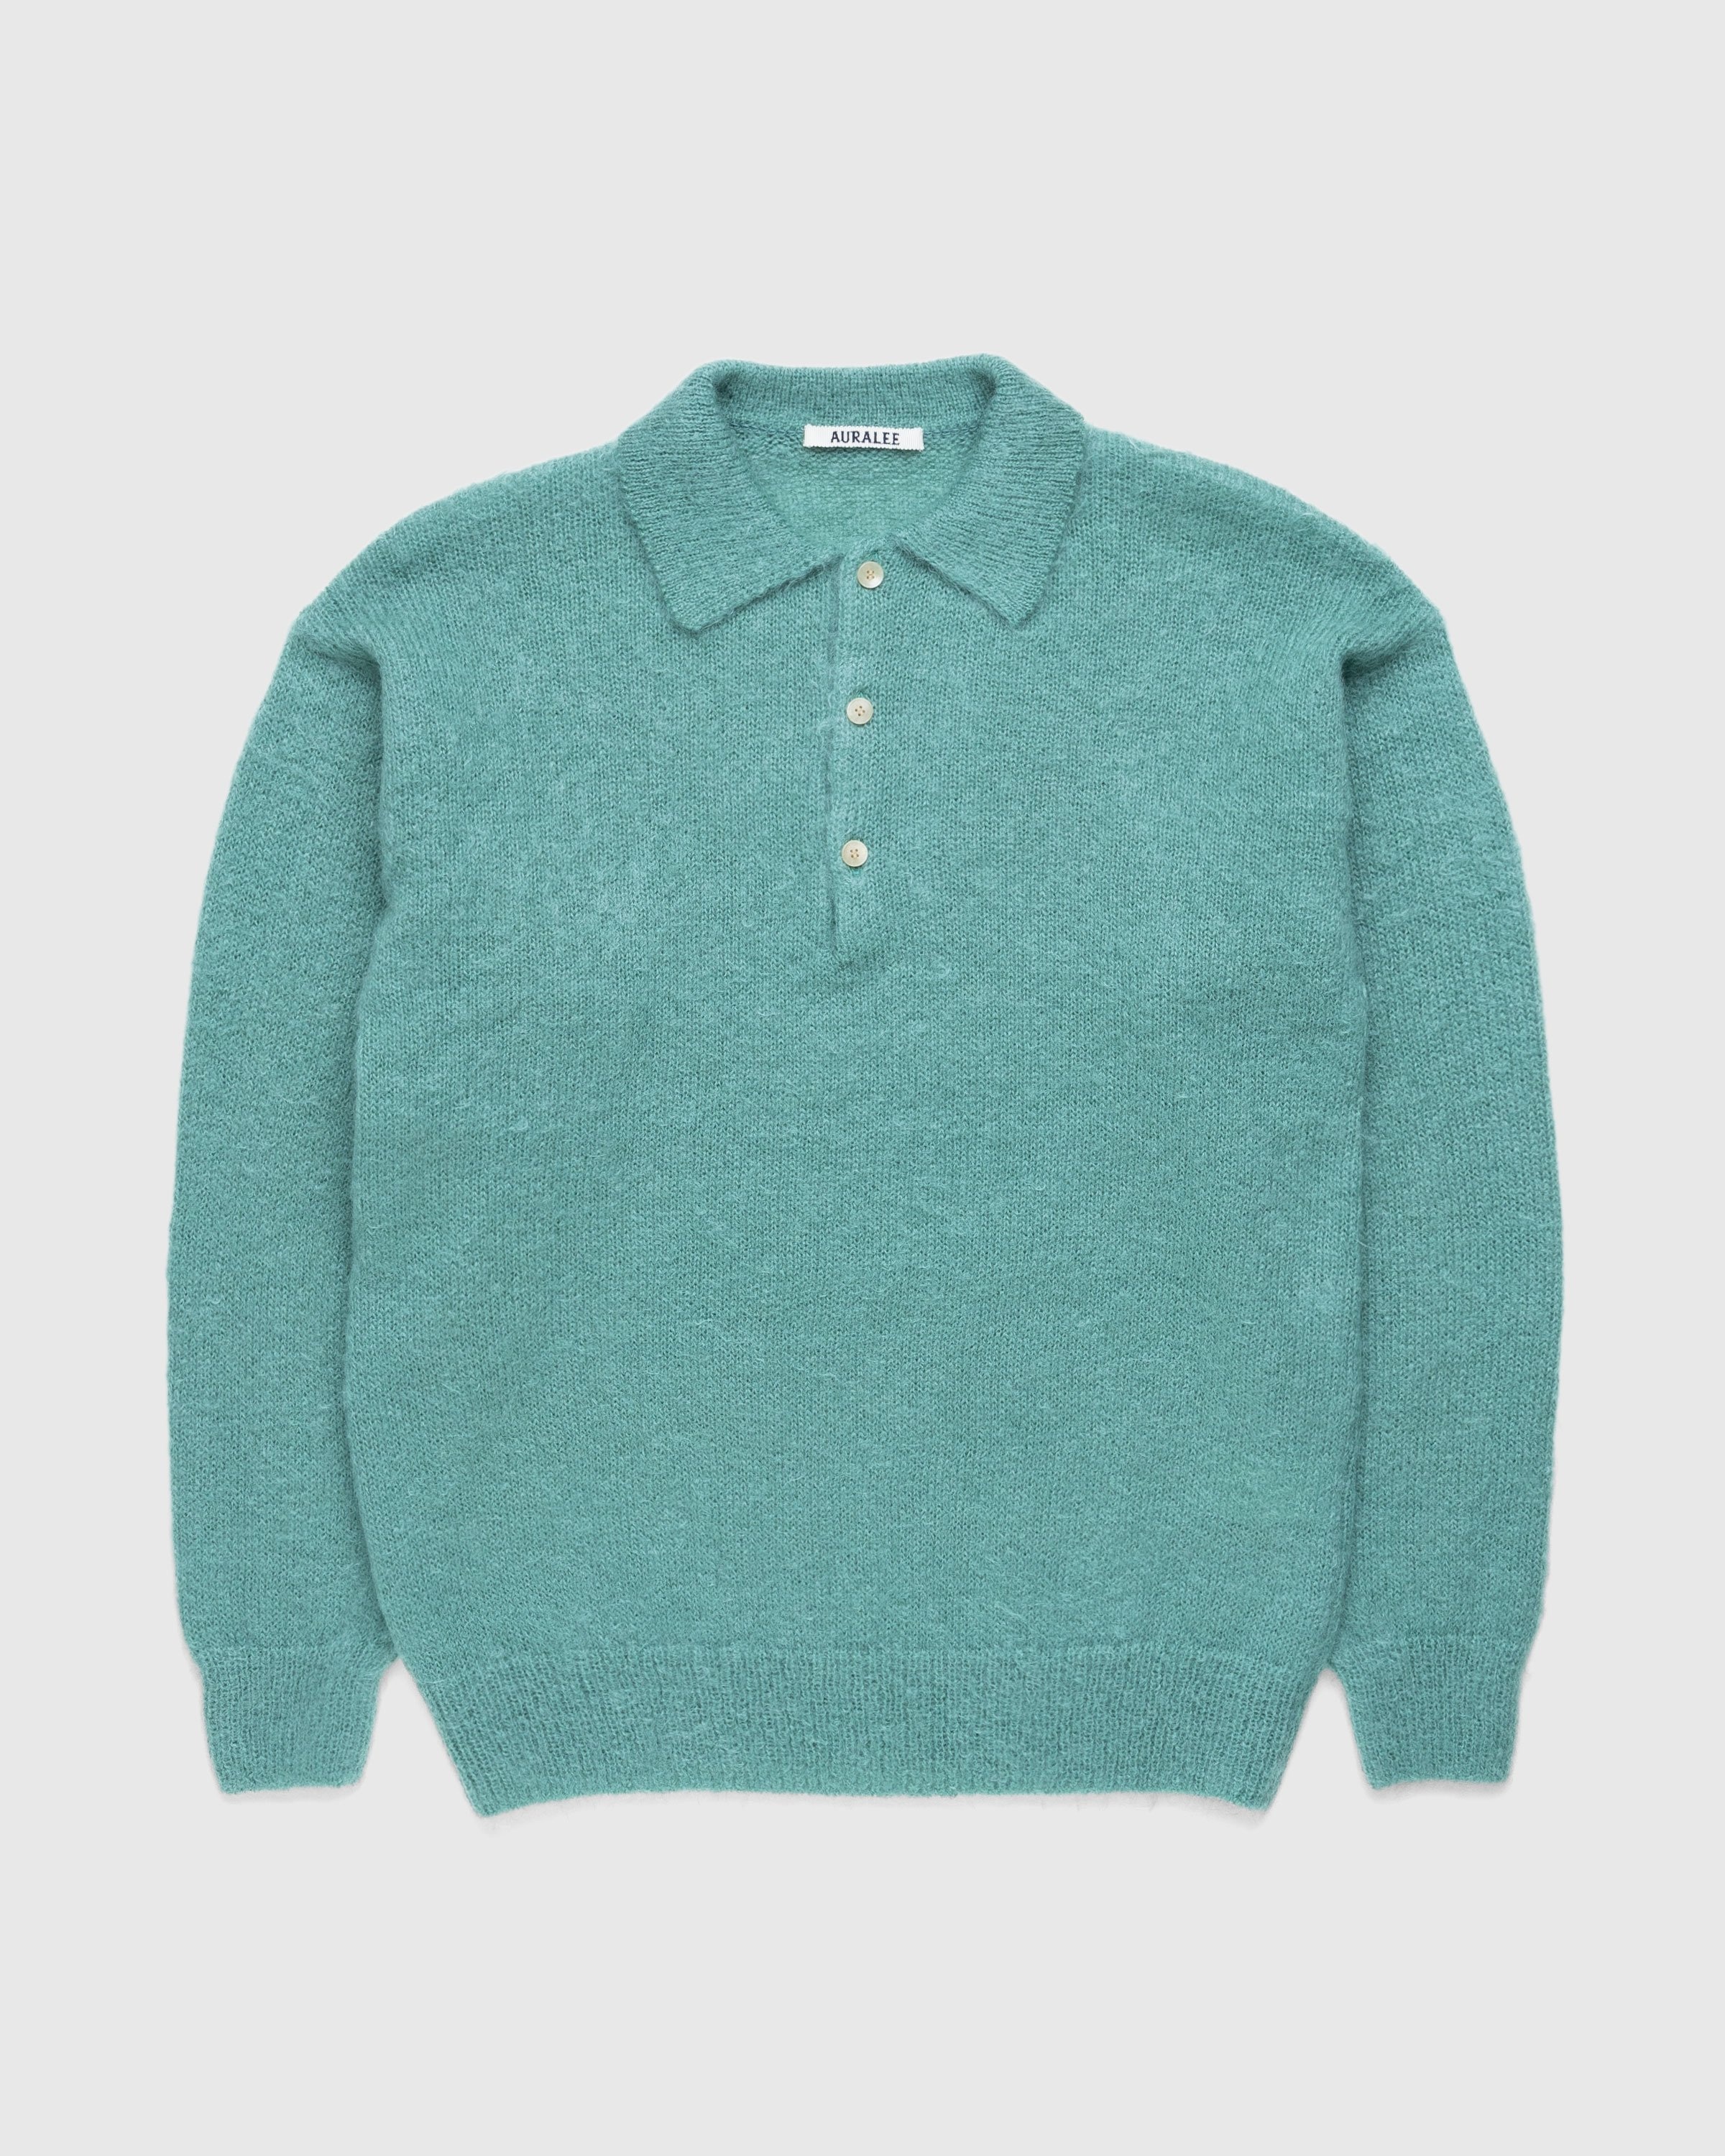 Auralee – Brushed Mohair Knit Polo Jade Green | Highsnobiety Shop